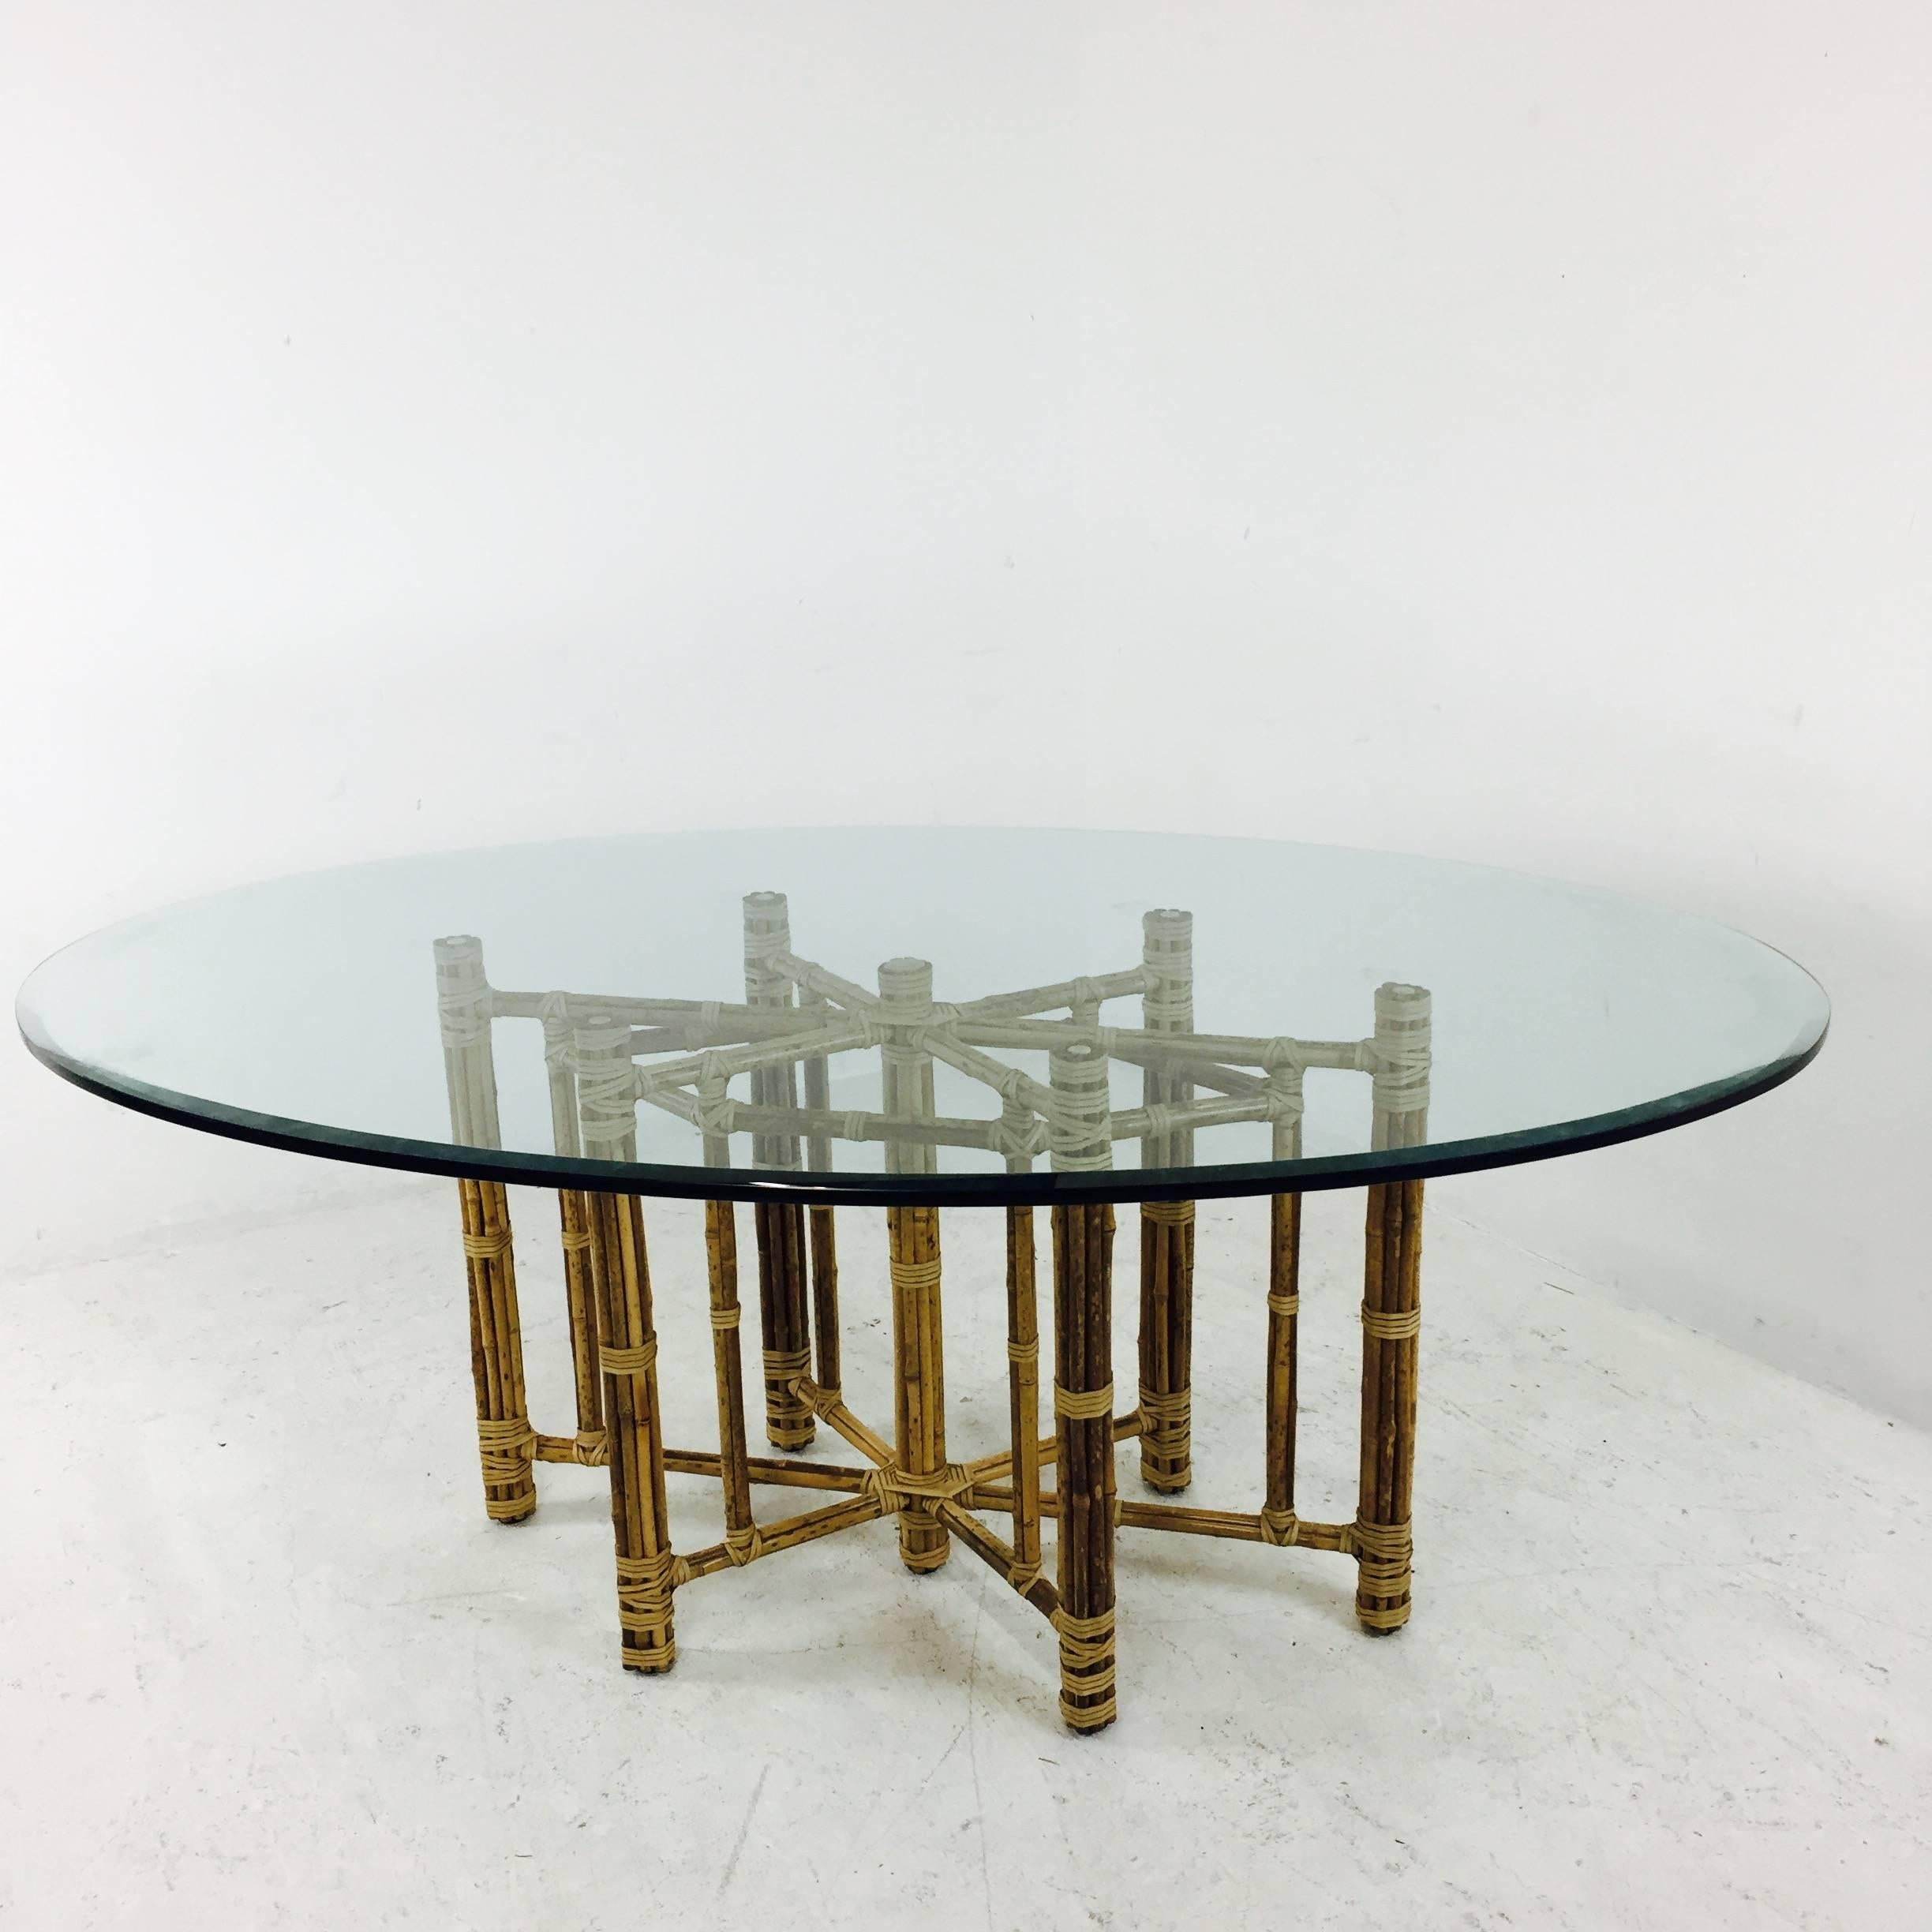 Bamboo oval glass dining table by McGuire with leather straps. The glass is 1/2" thick with bevelled edges with minimal wear. The bamboo has a patina to the finish and can be used as is or refinished, depending on preference, circa 1960s.
See